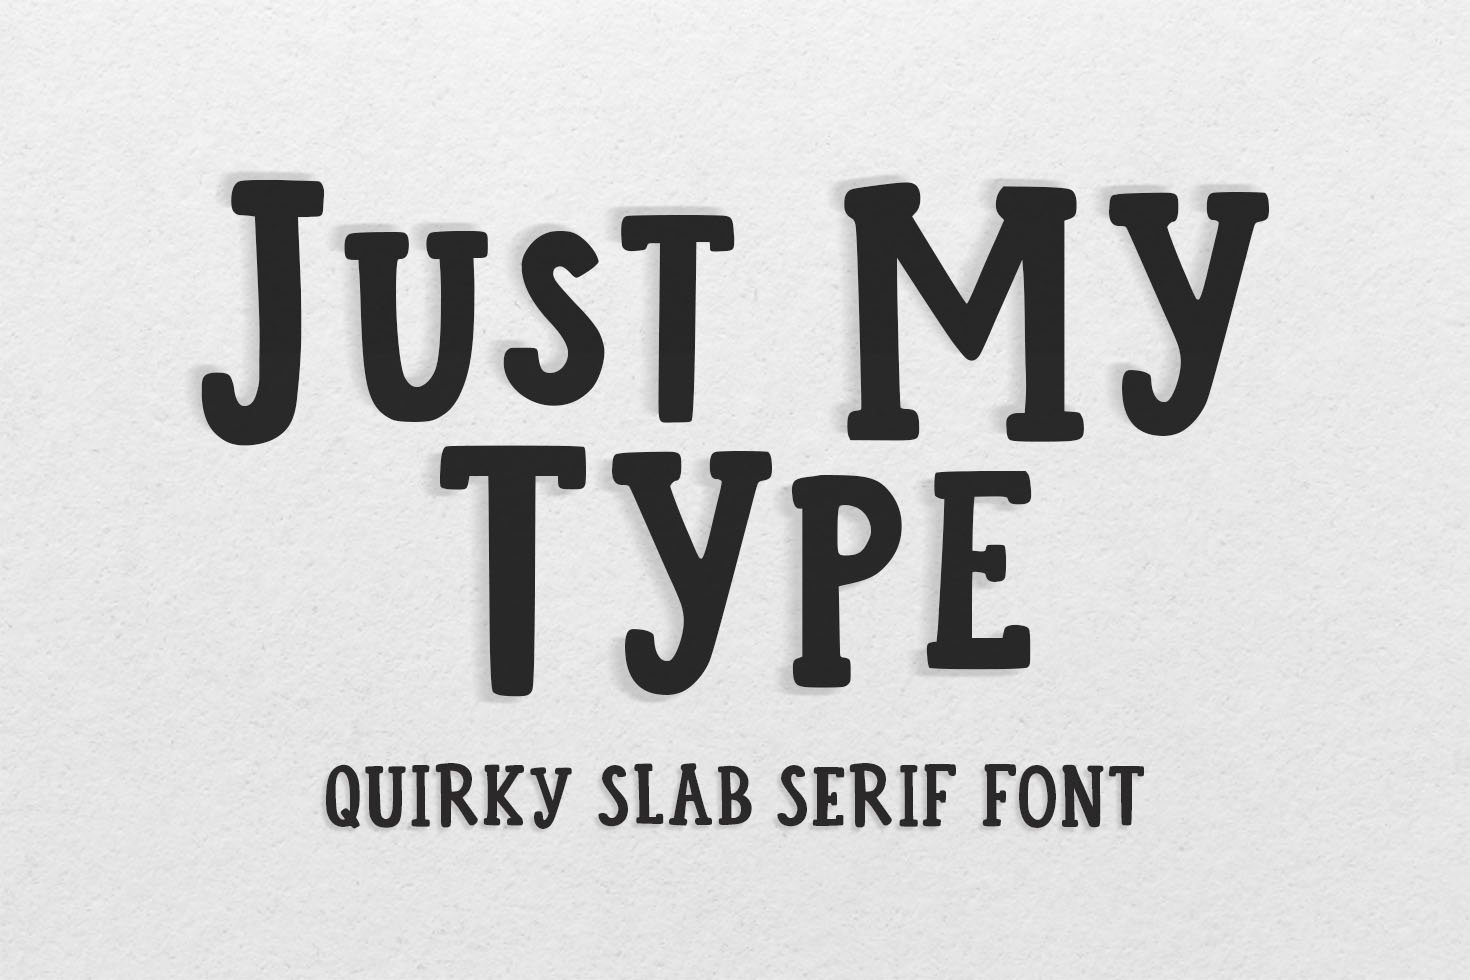 Just My Type Quirky Slab Serif Font cover image.